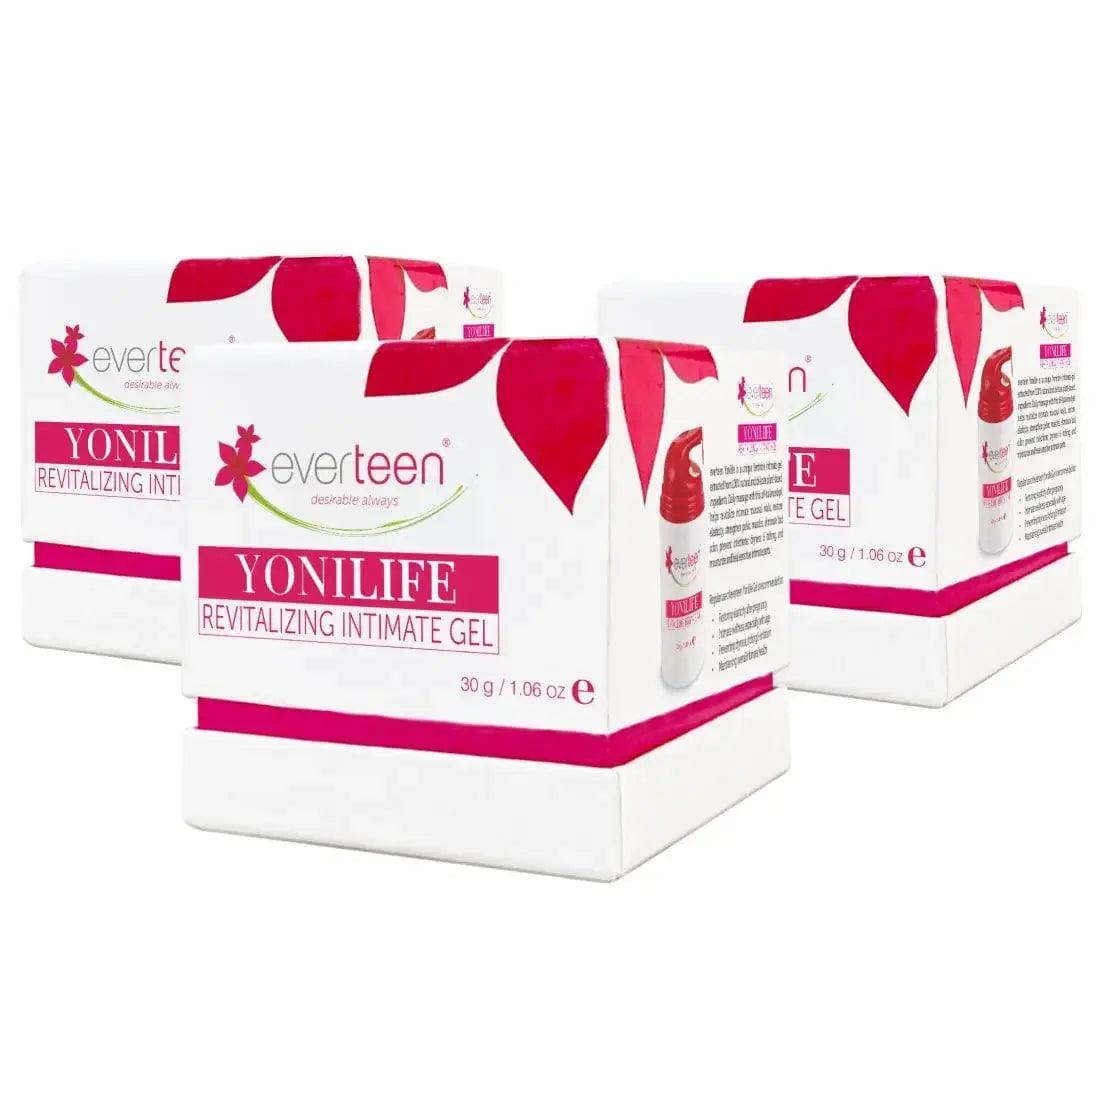 everteen Yonilife Gel for Revitalizing Intimate Parts in Women - 30g 9559682308870